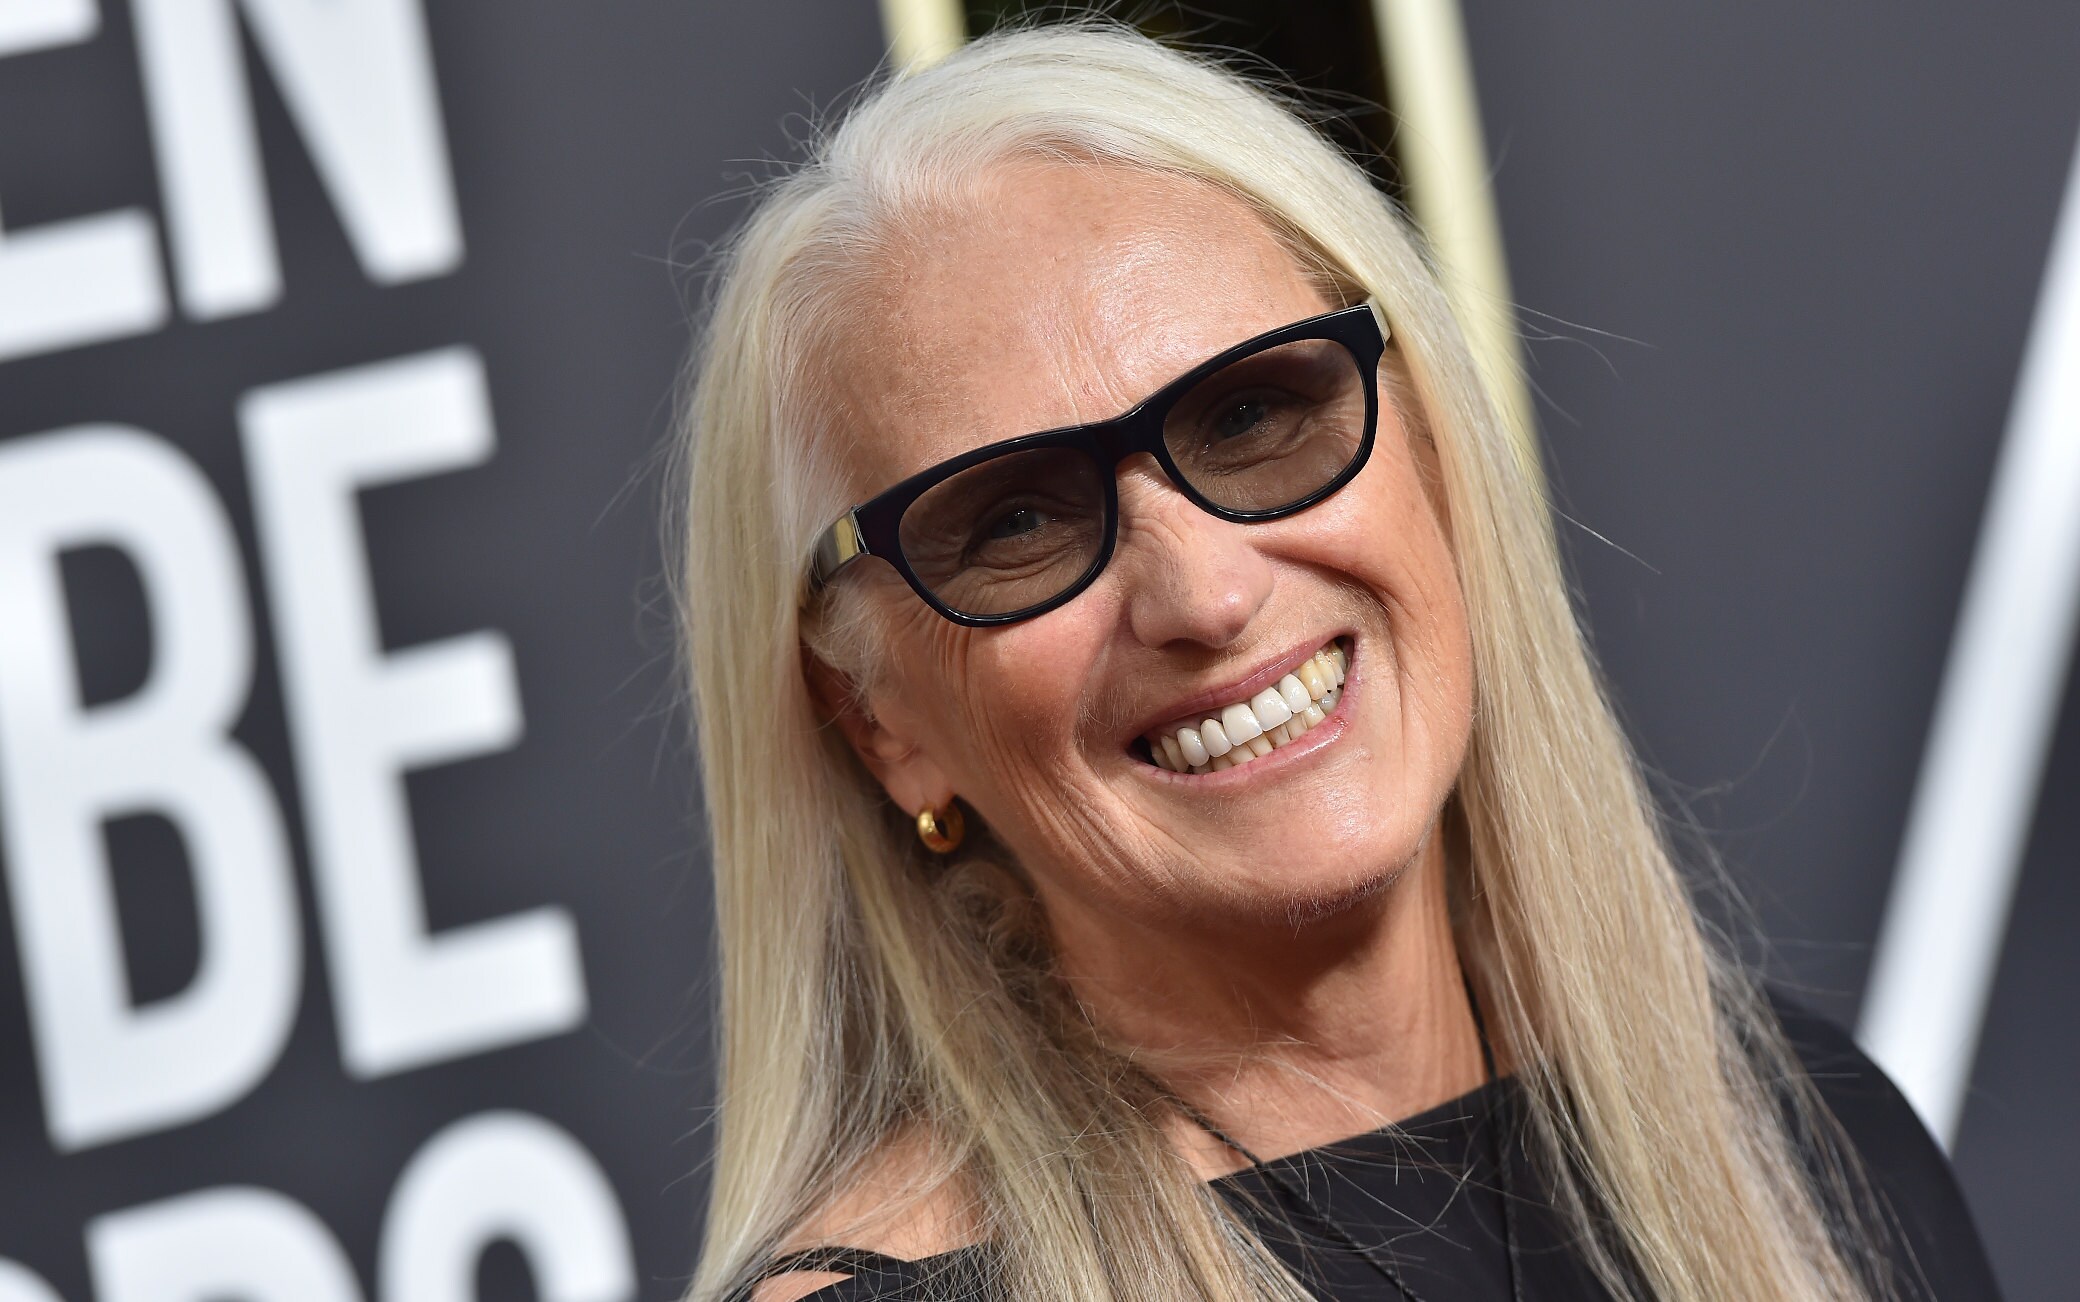 Golden Globes 2022, Jane Campion is the third woman to win in the director category